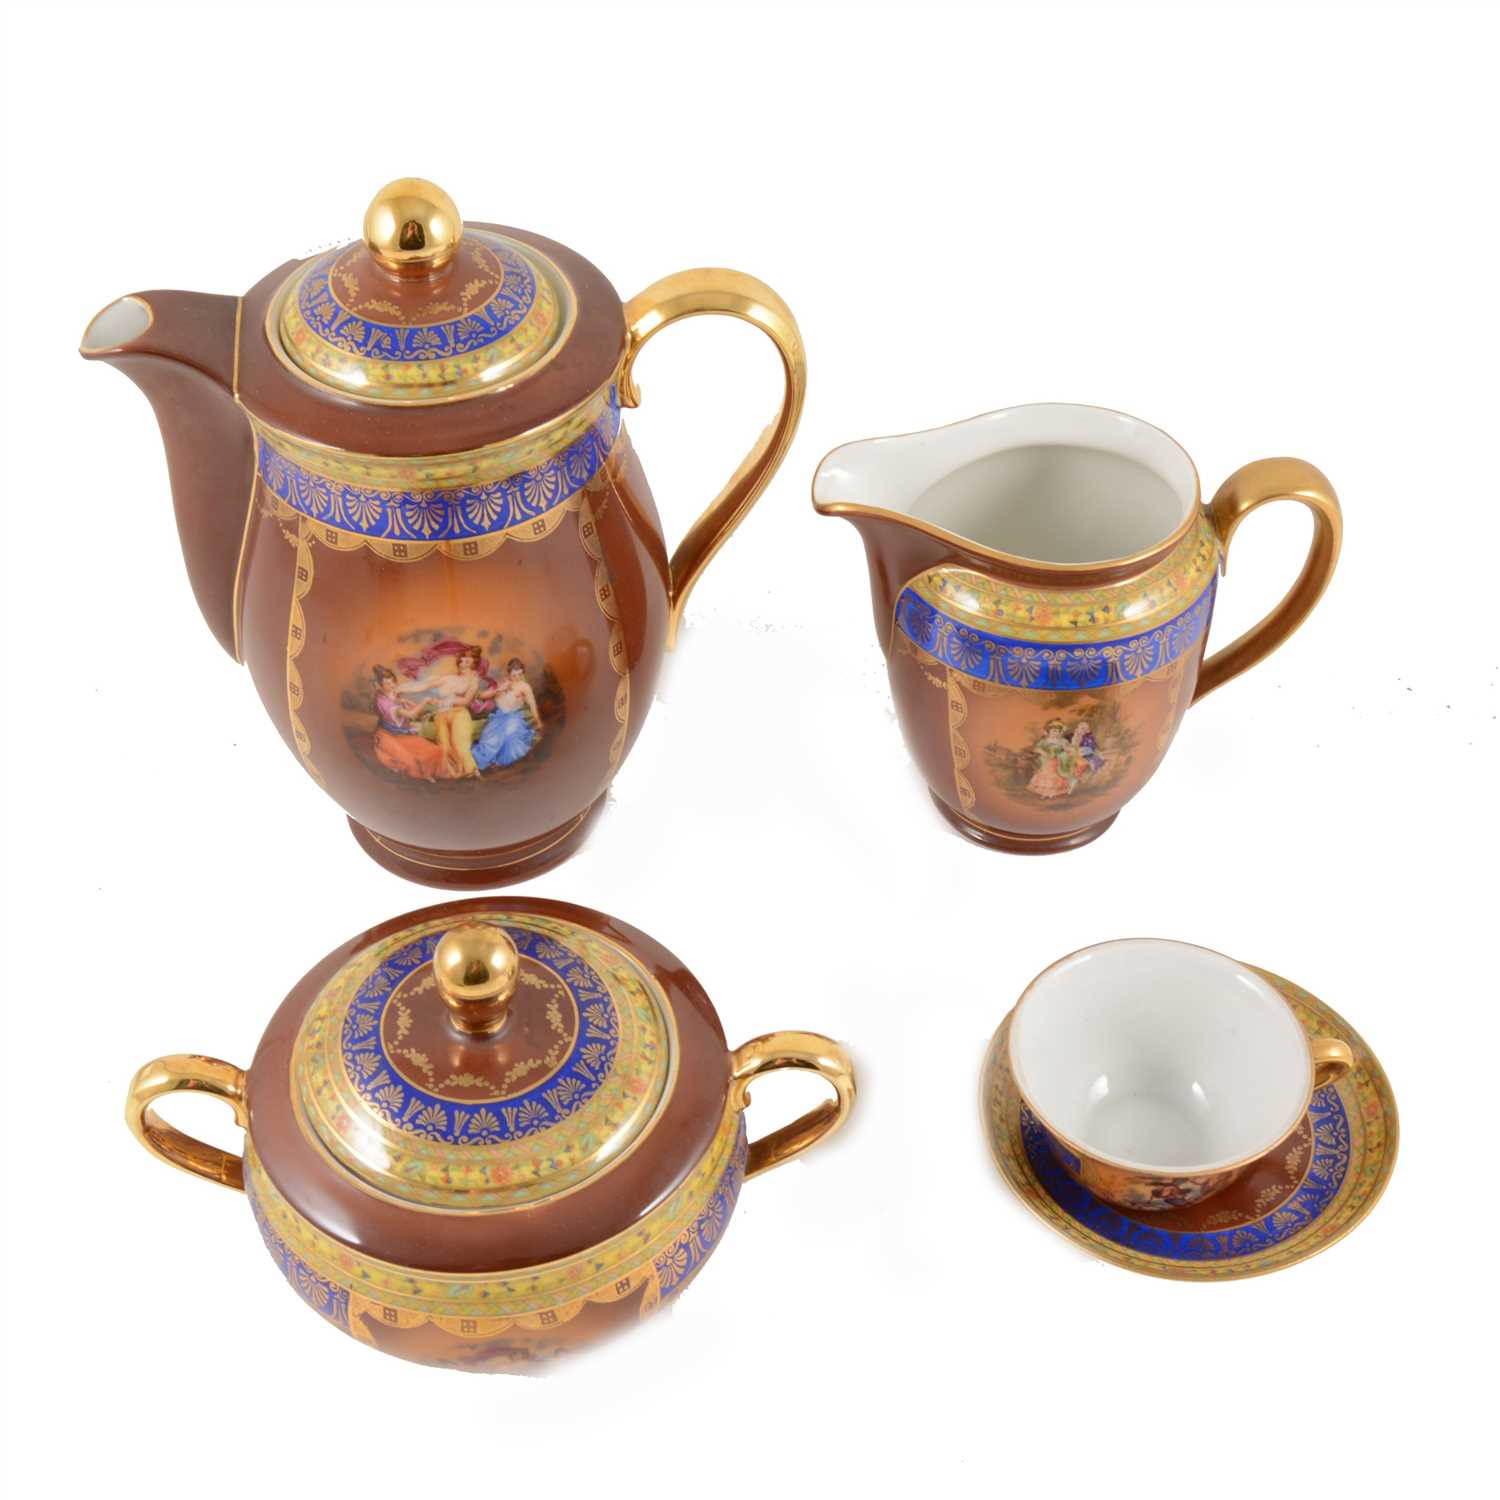 Lot 2 - A Slovakia coffee service in the "Rembrandt" design, burgundy ground with borders of blue and gilt, yellow floral.